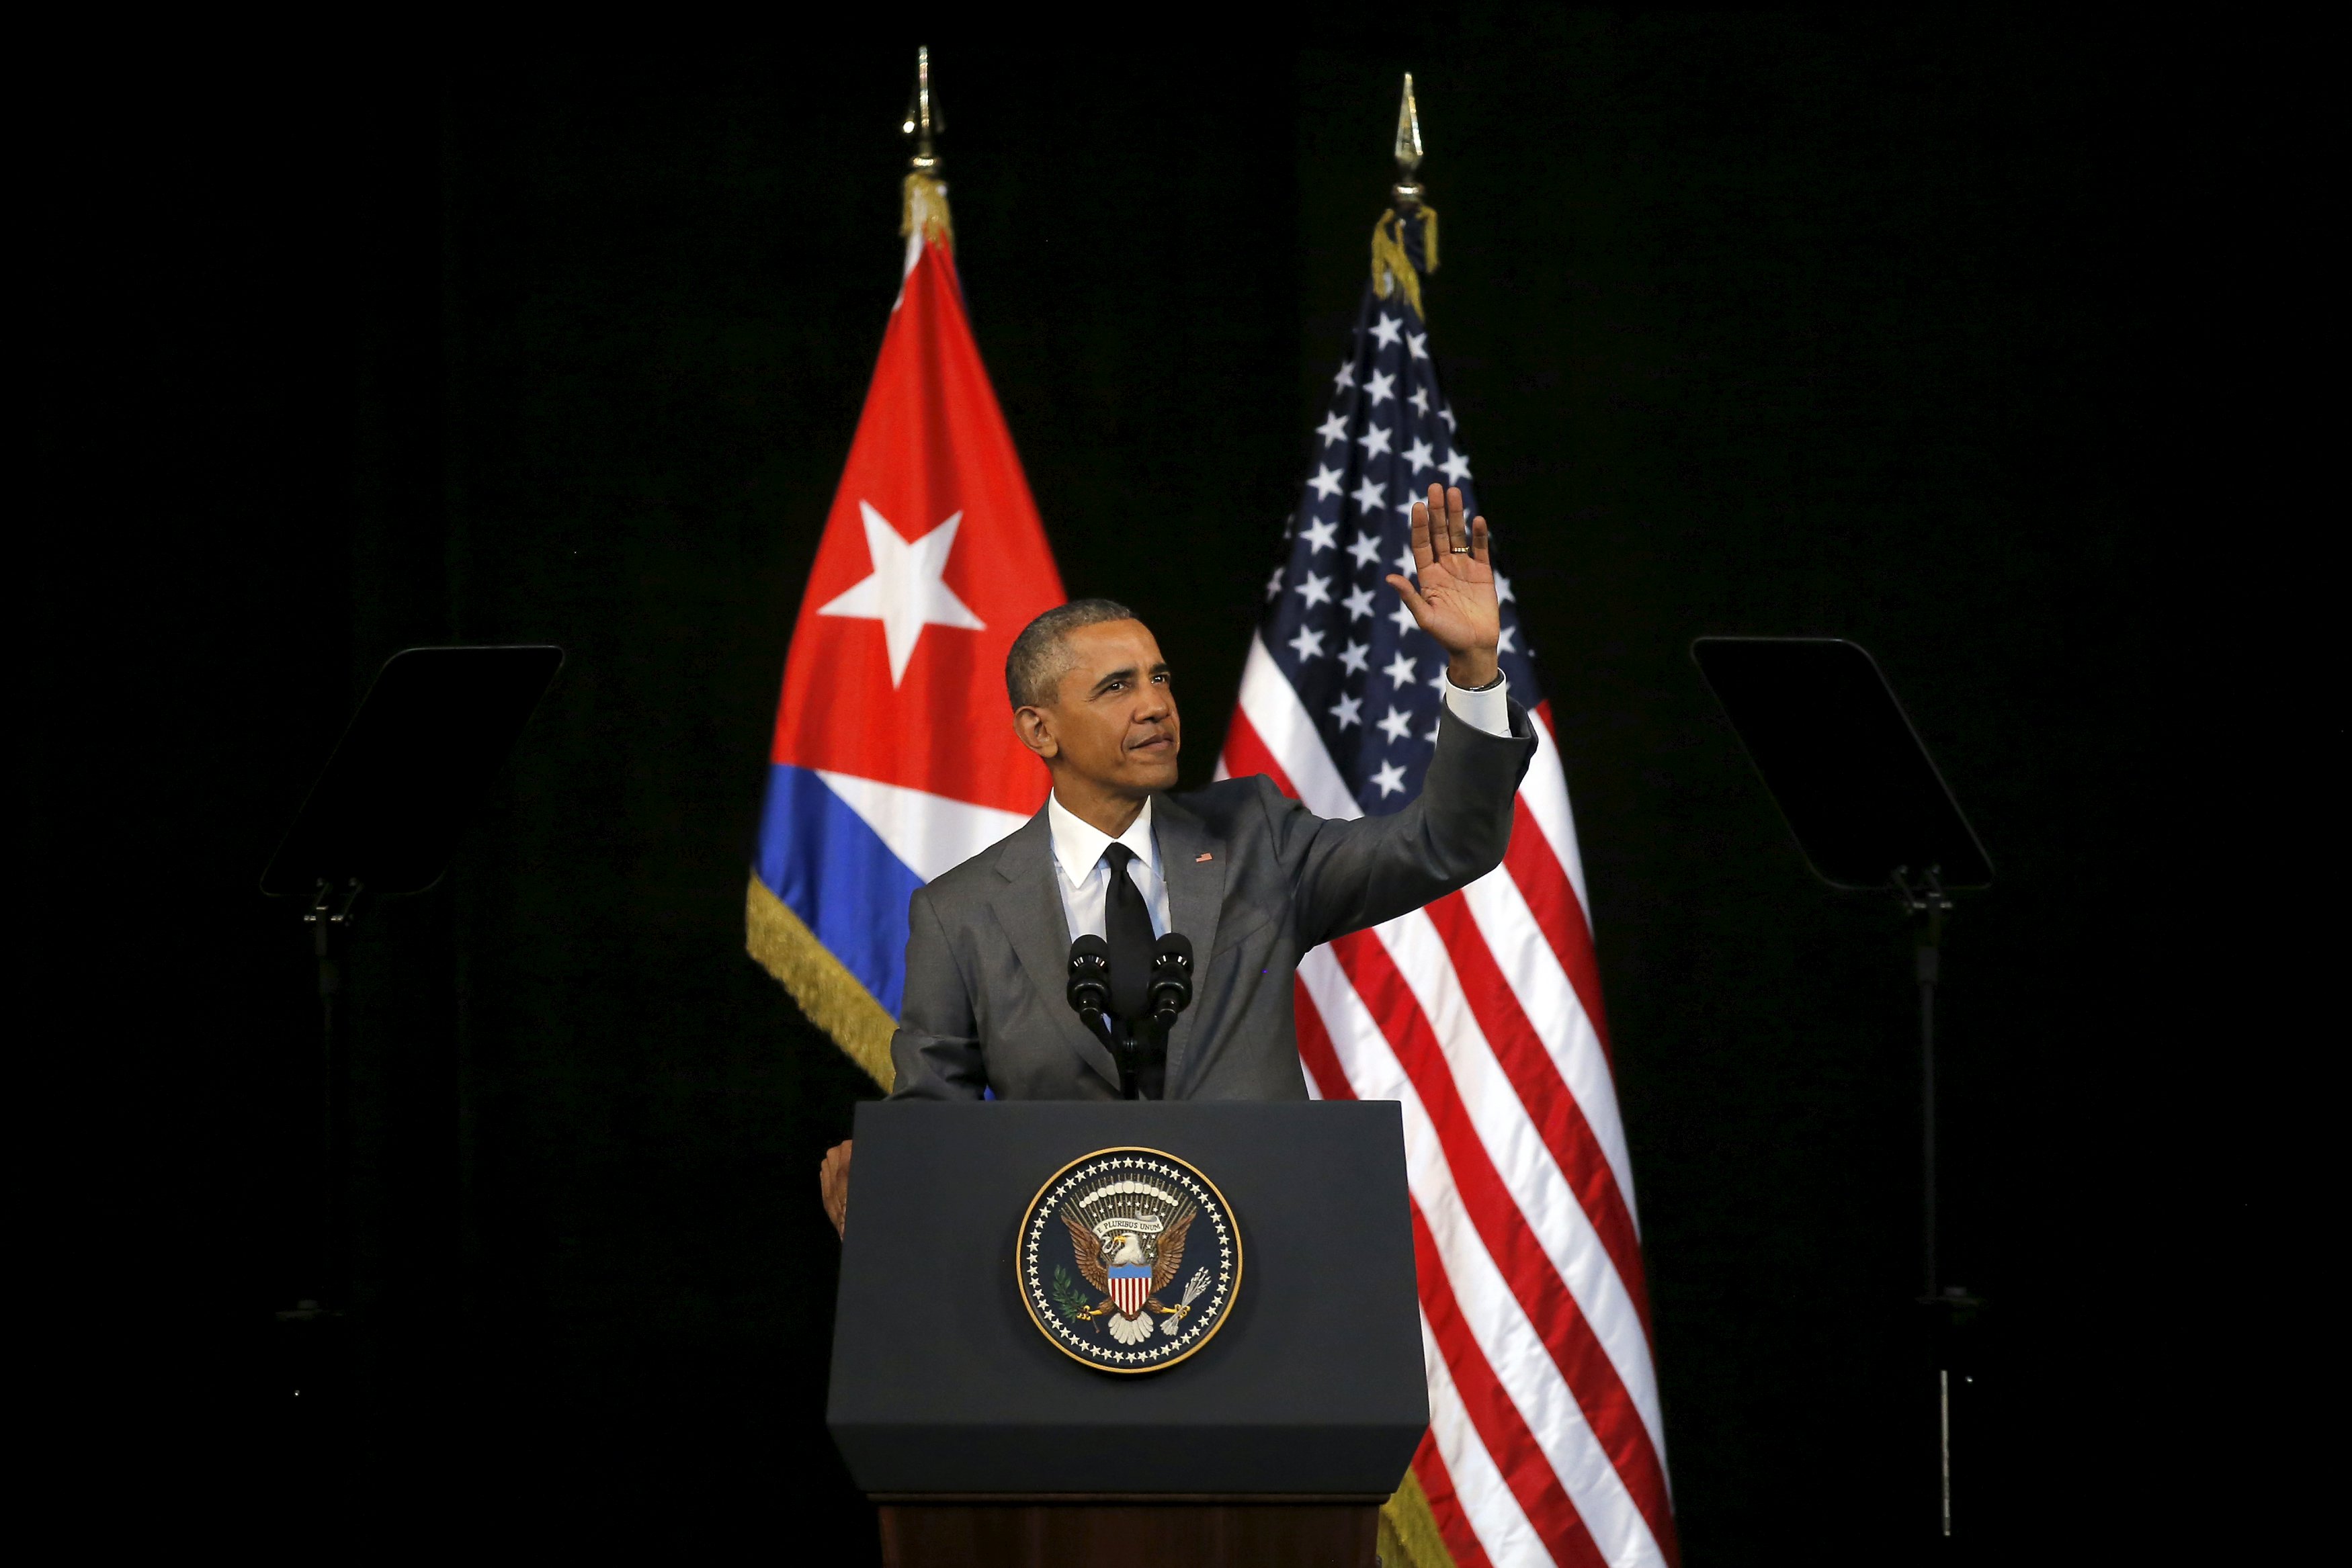 Castro And Obama President Obamas Historic Visit To Cuba Pictures